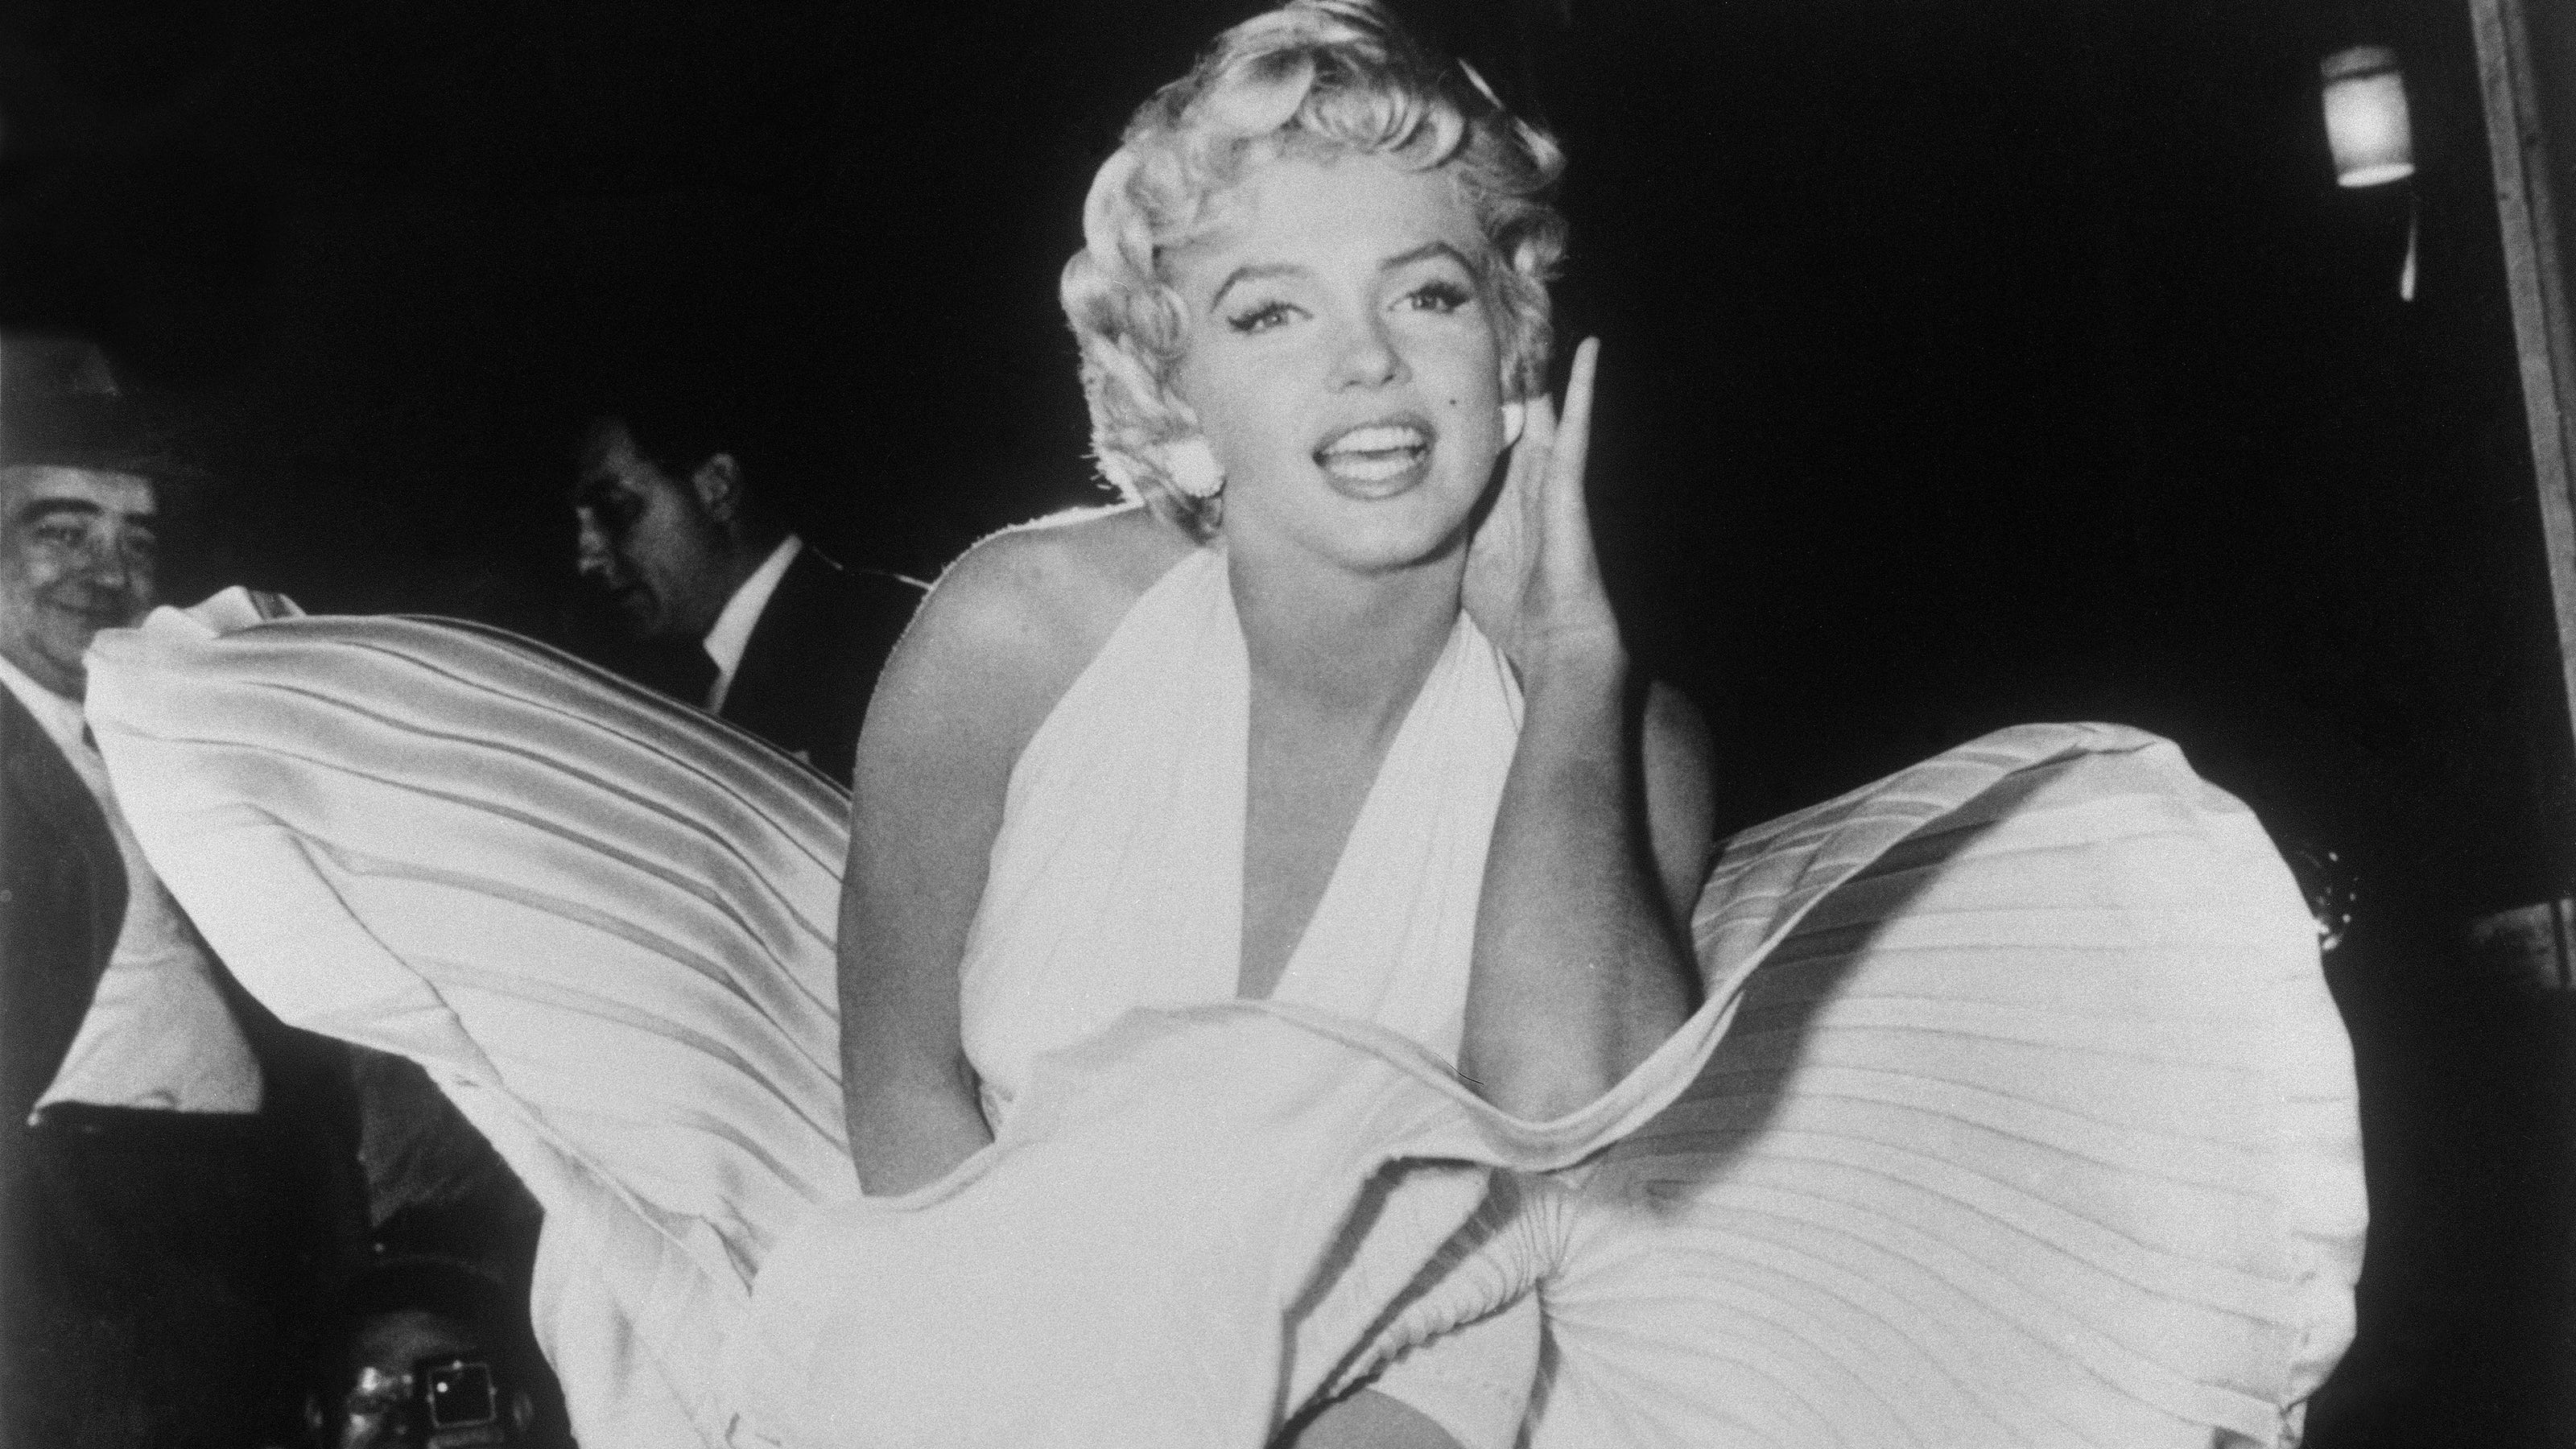 A long-lost Marilyn Monroe nude scene has been discovered